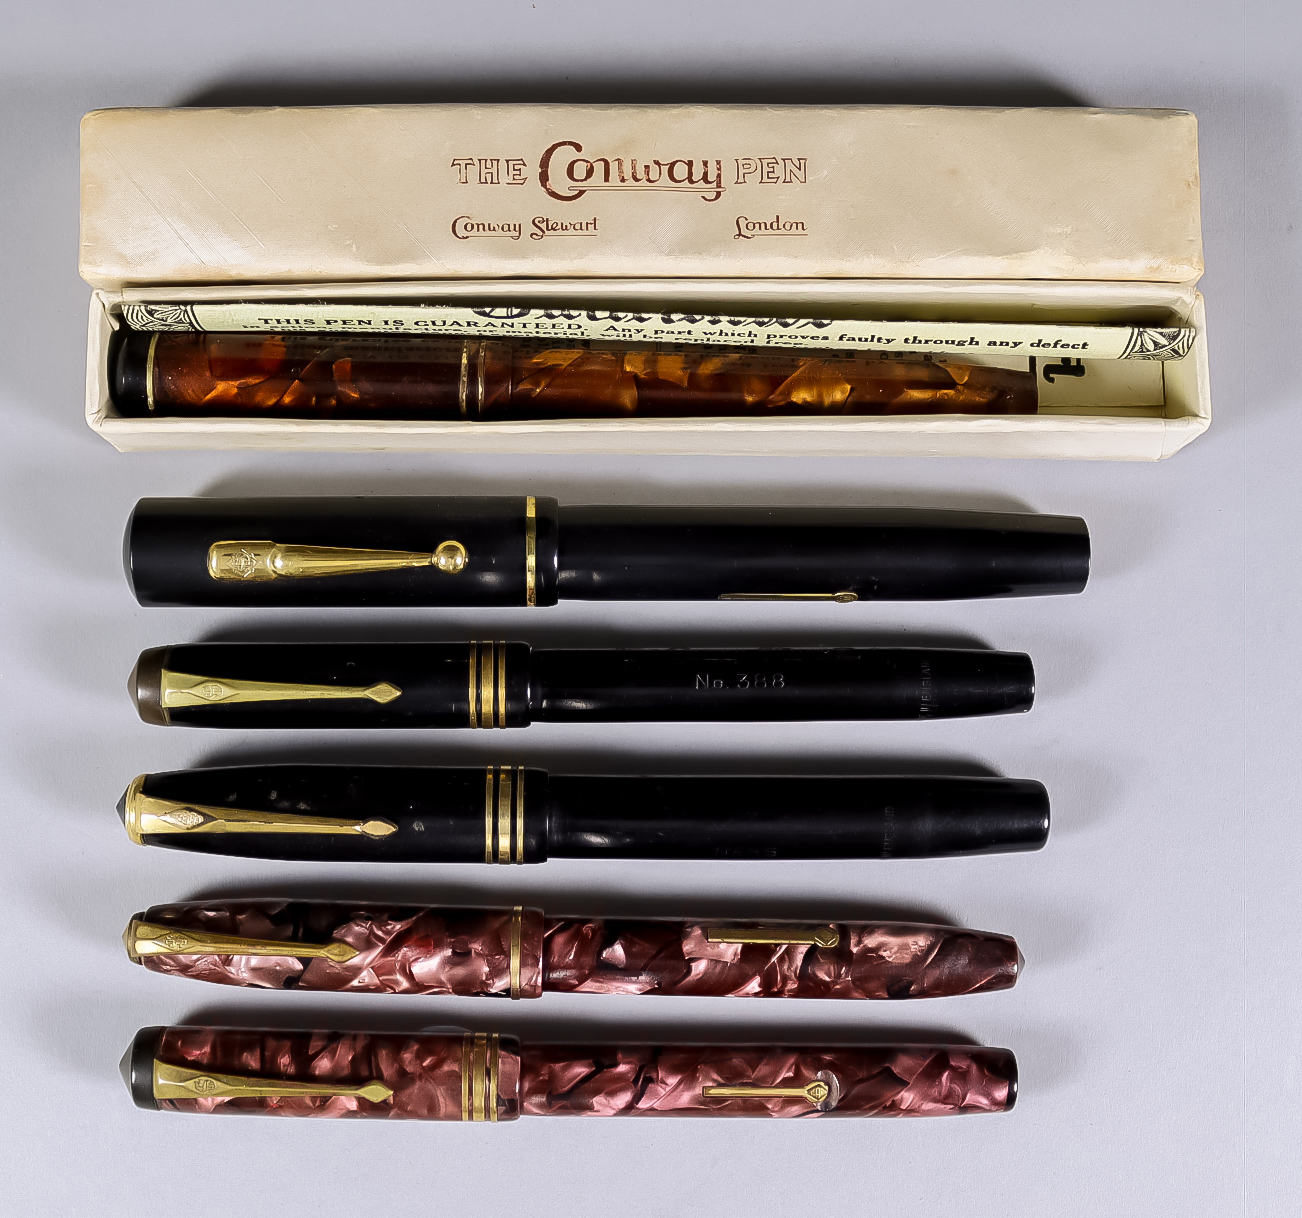 Six Fountain Pens by Conway Stewart, all with gold nibs